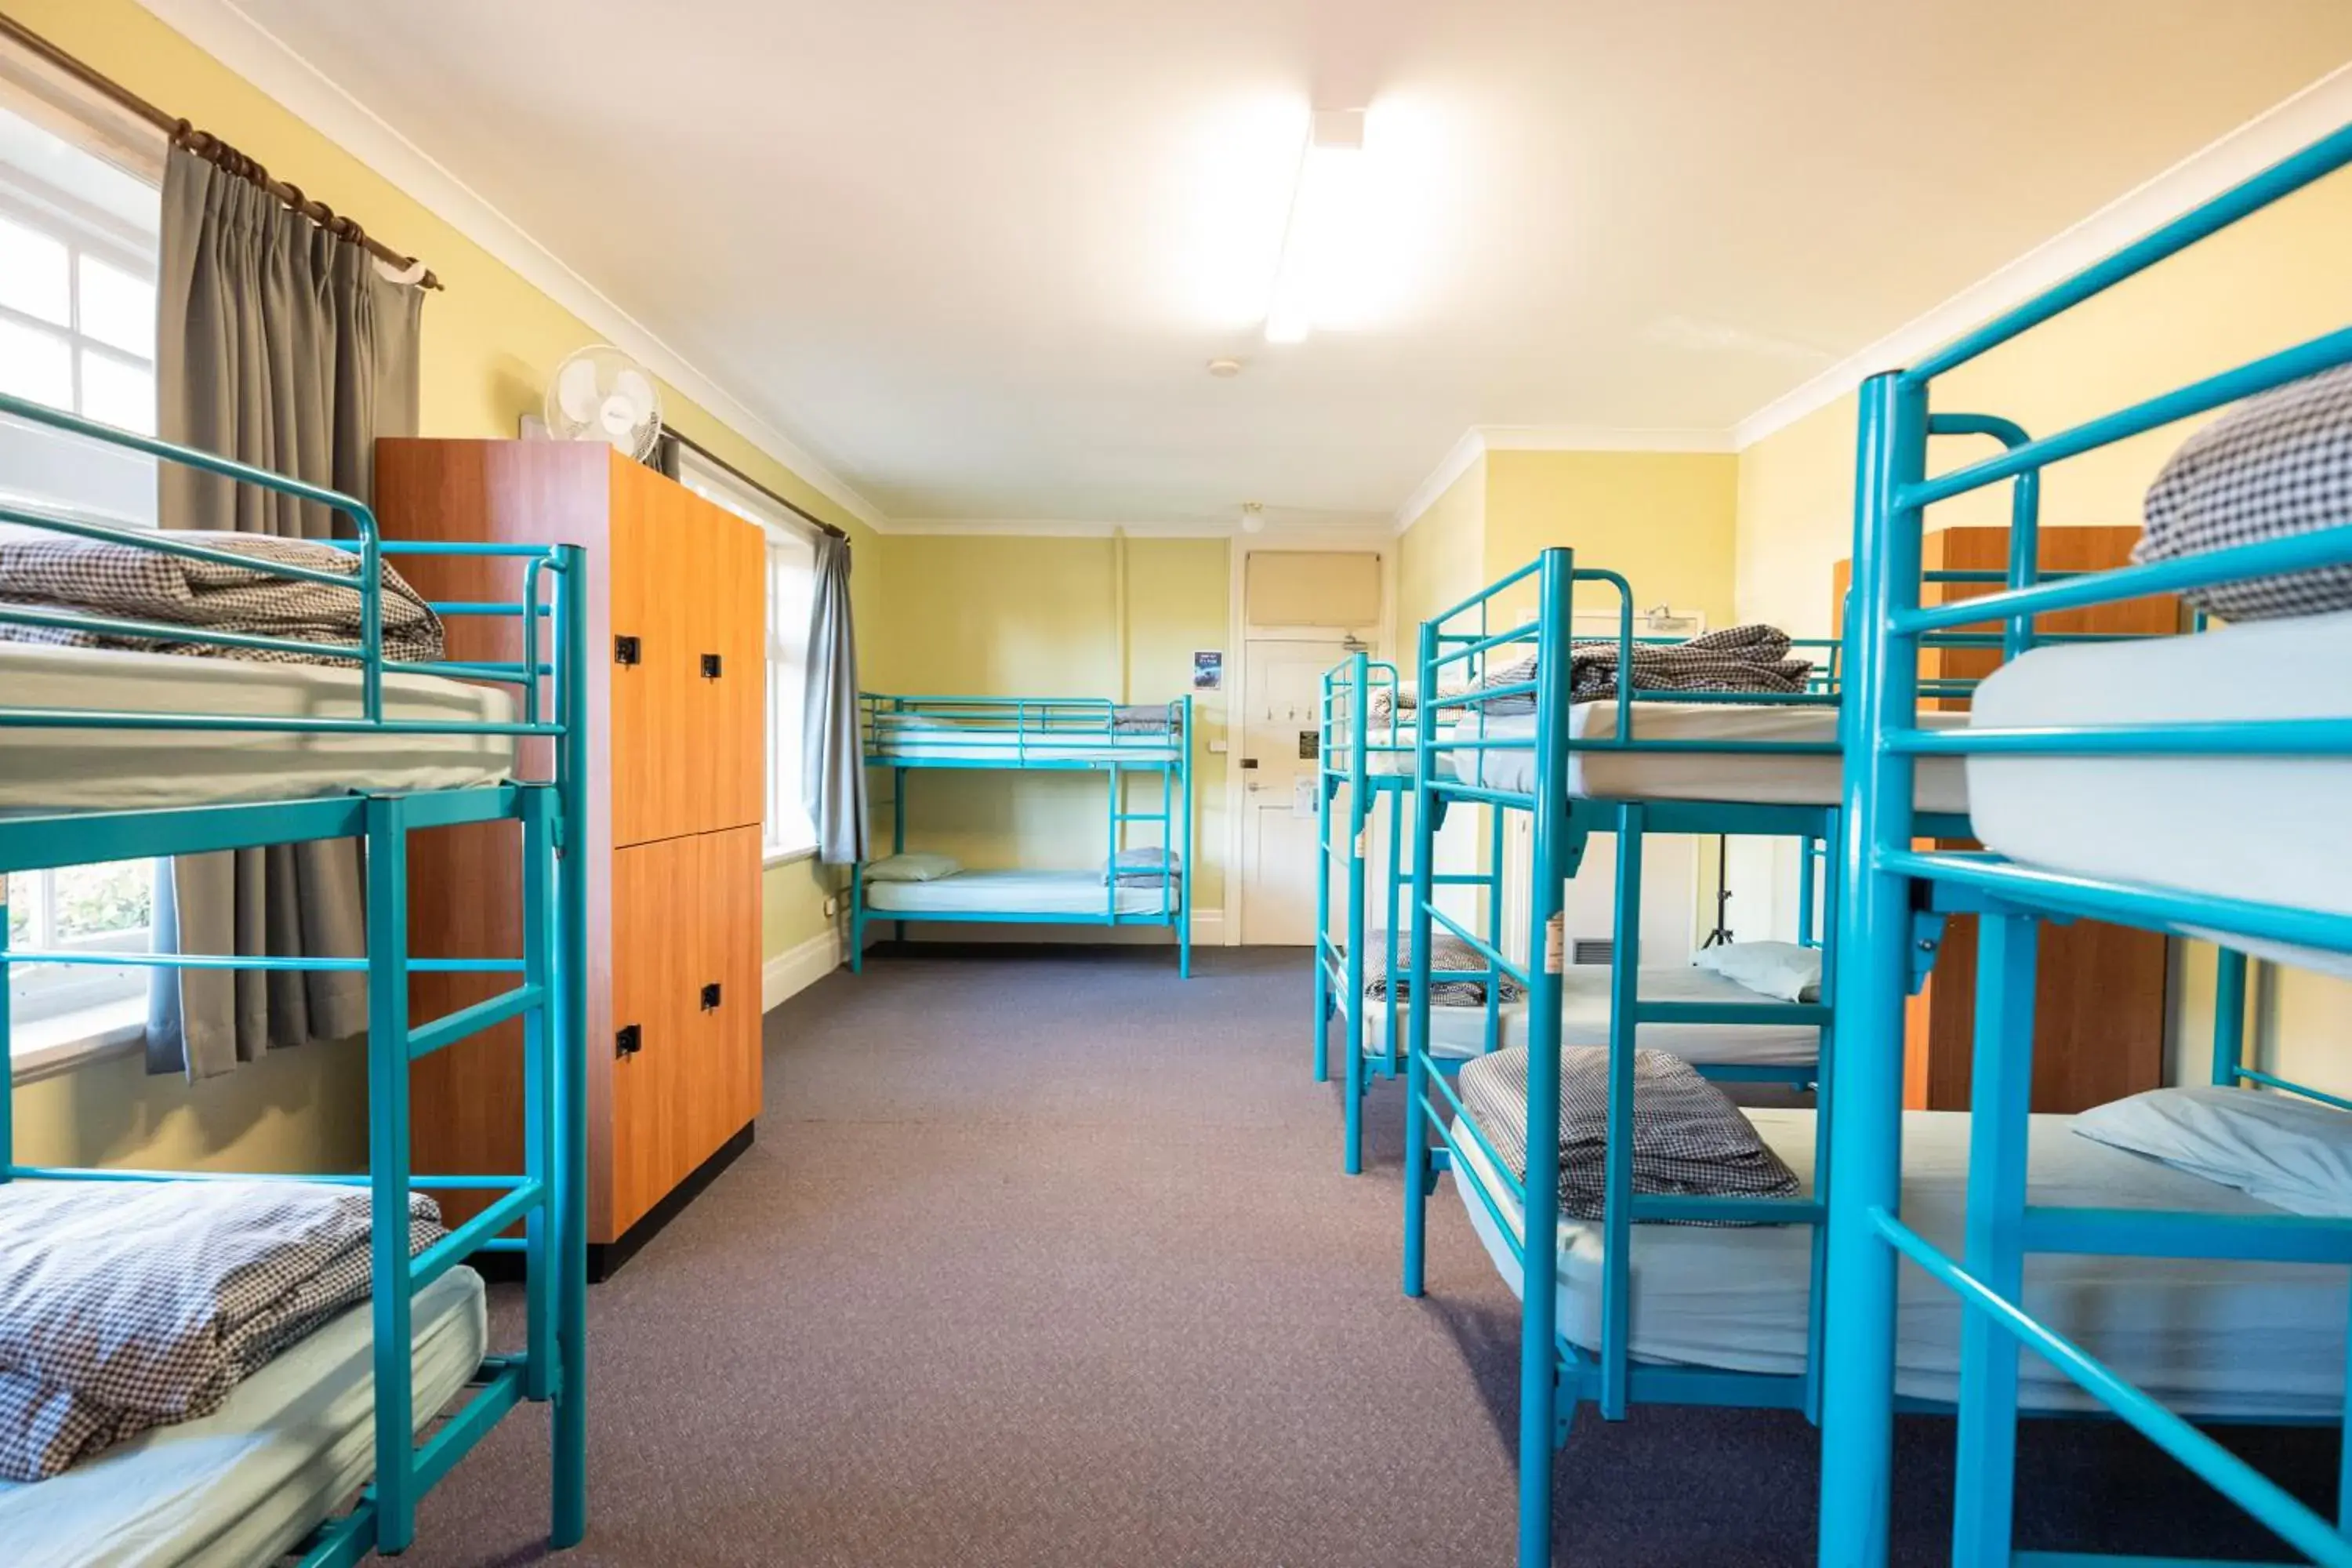 1 Bed in 10-Bed Mixed Dormitory Room in Newcastle Beach YHA Hostel